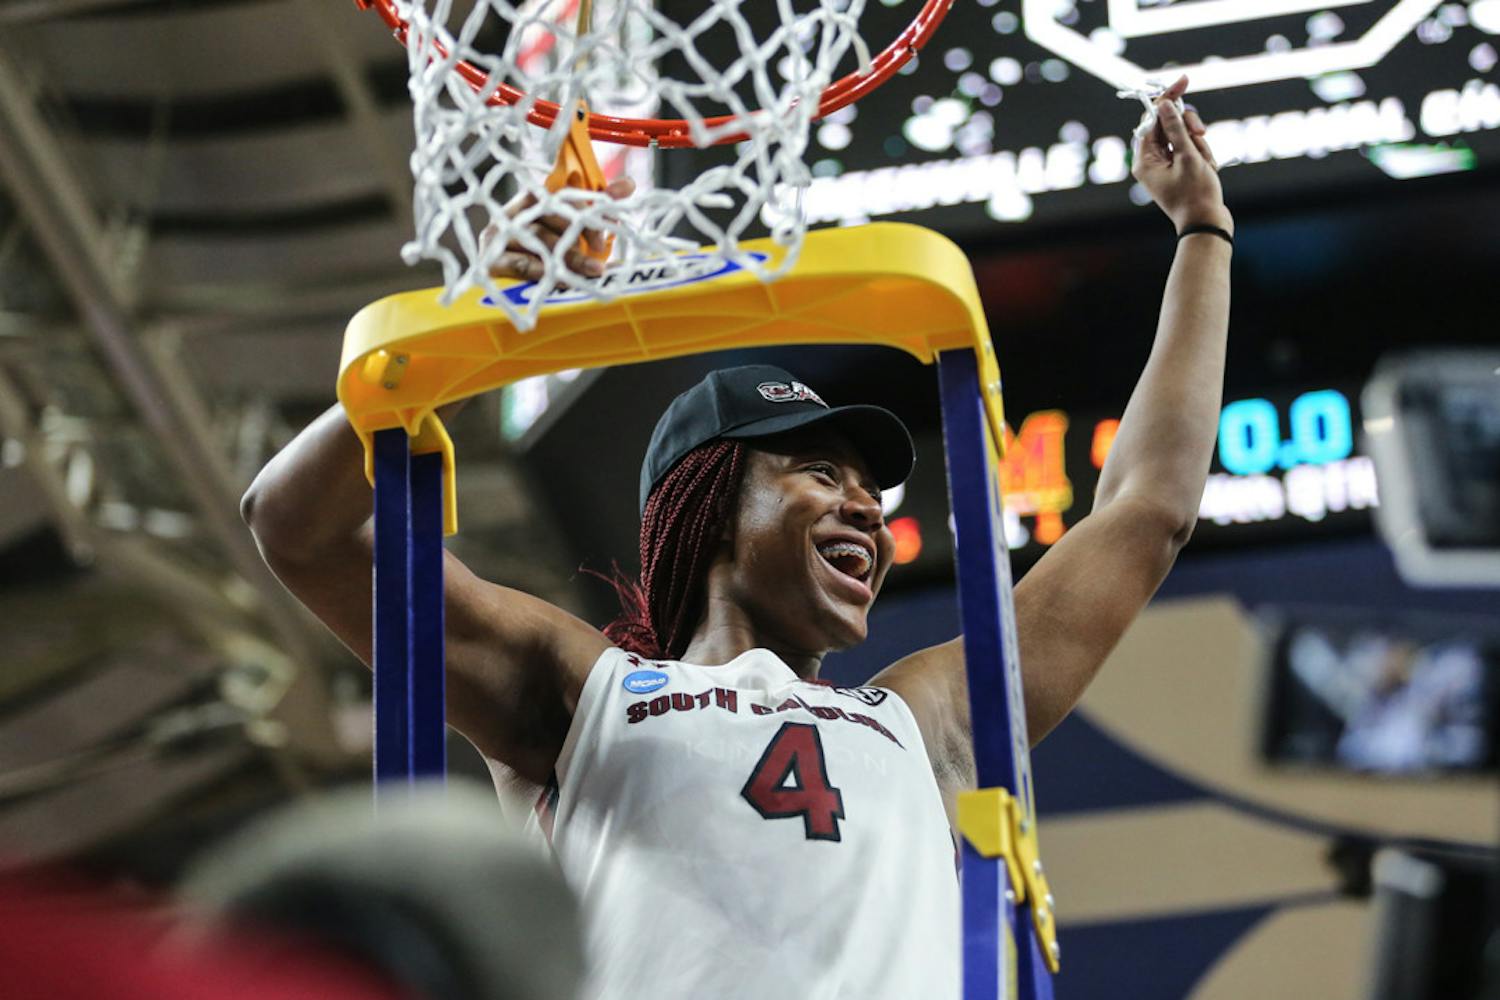 Senior forward Aliyah Boston cuts a piece off of the basket from the Elite Eight game on March 27, 2023, at the Bon Secours Wellness Arena in Greenville, S.C. The Gamecocks defeated Maryland 86-75.